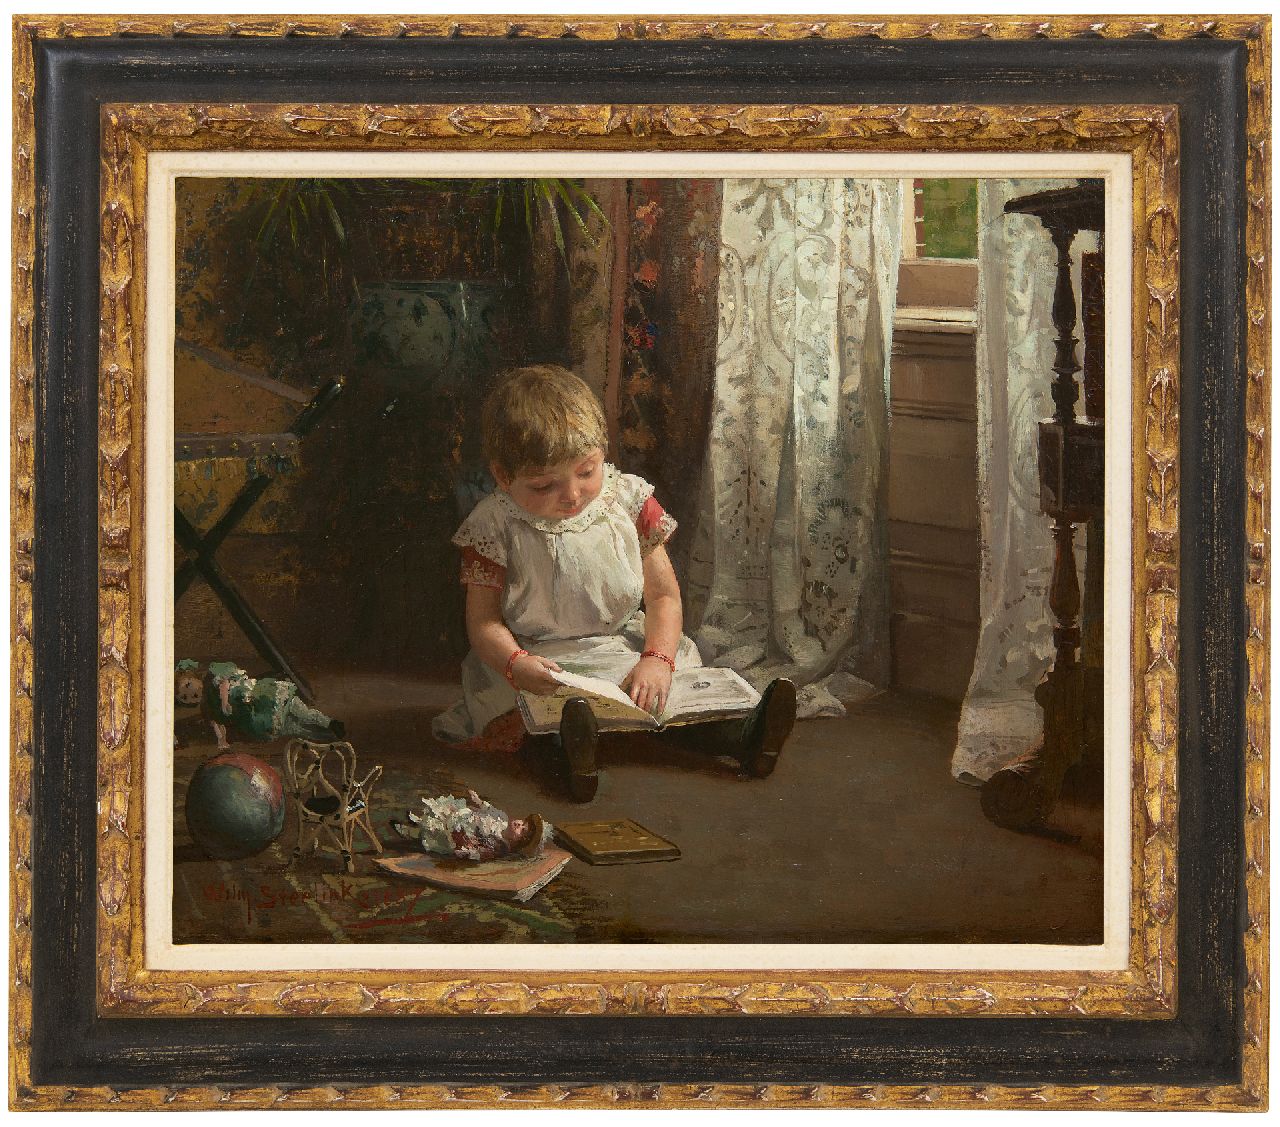 Steelink jr. W.  | Willem Steelink jr. | Paintings offered for sale | The picture book, oil on canvas 37.8 x 47.3 cm, signed l.l. and dated 1887